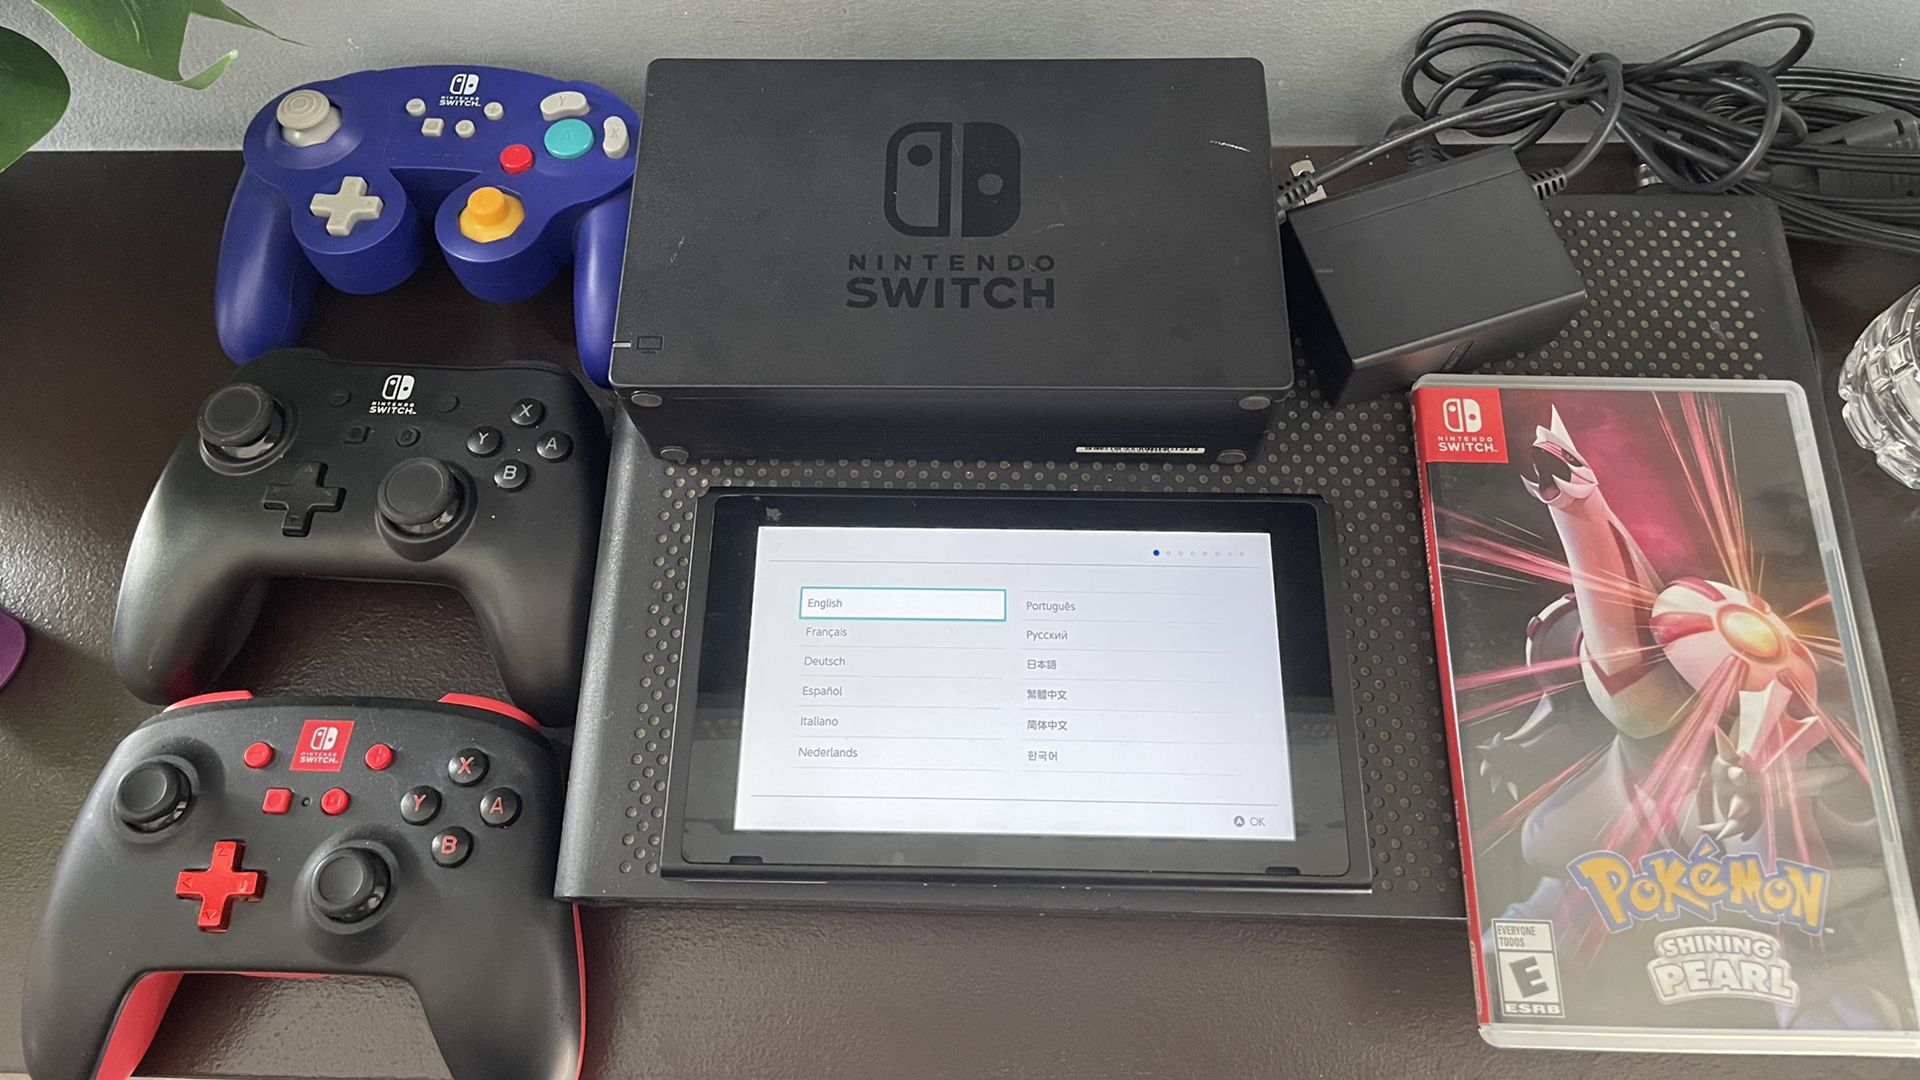 Nintendo Switch w/ Controllers and Pokémon Game